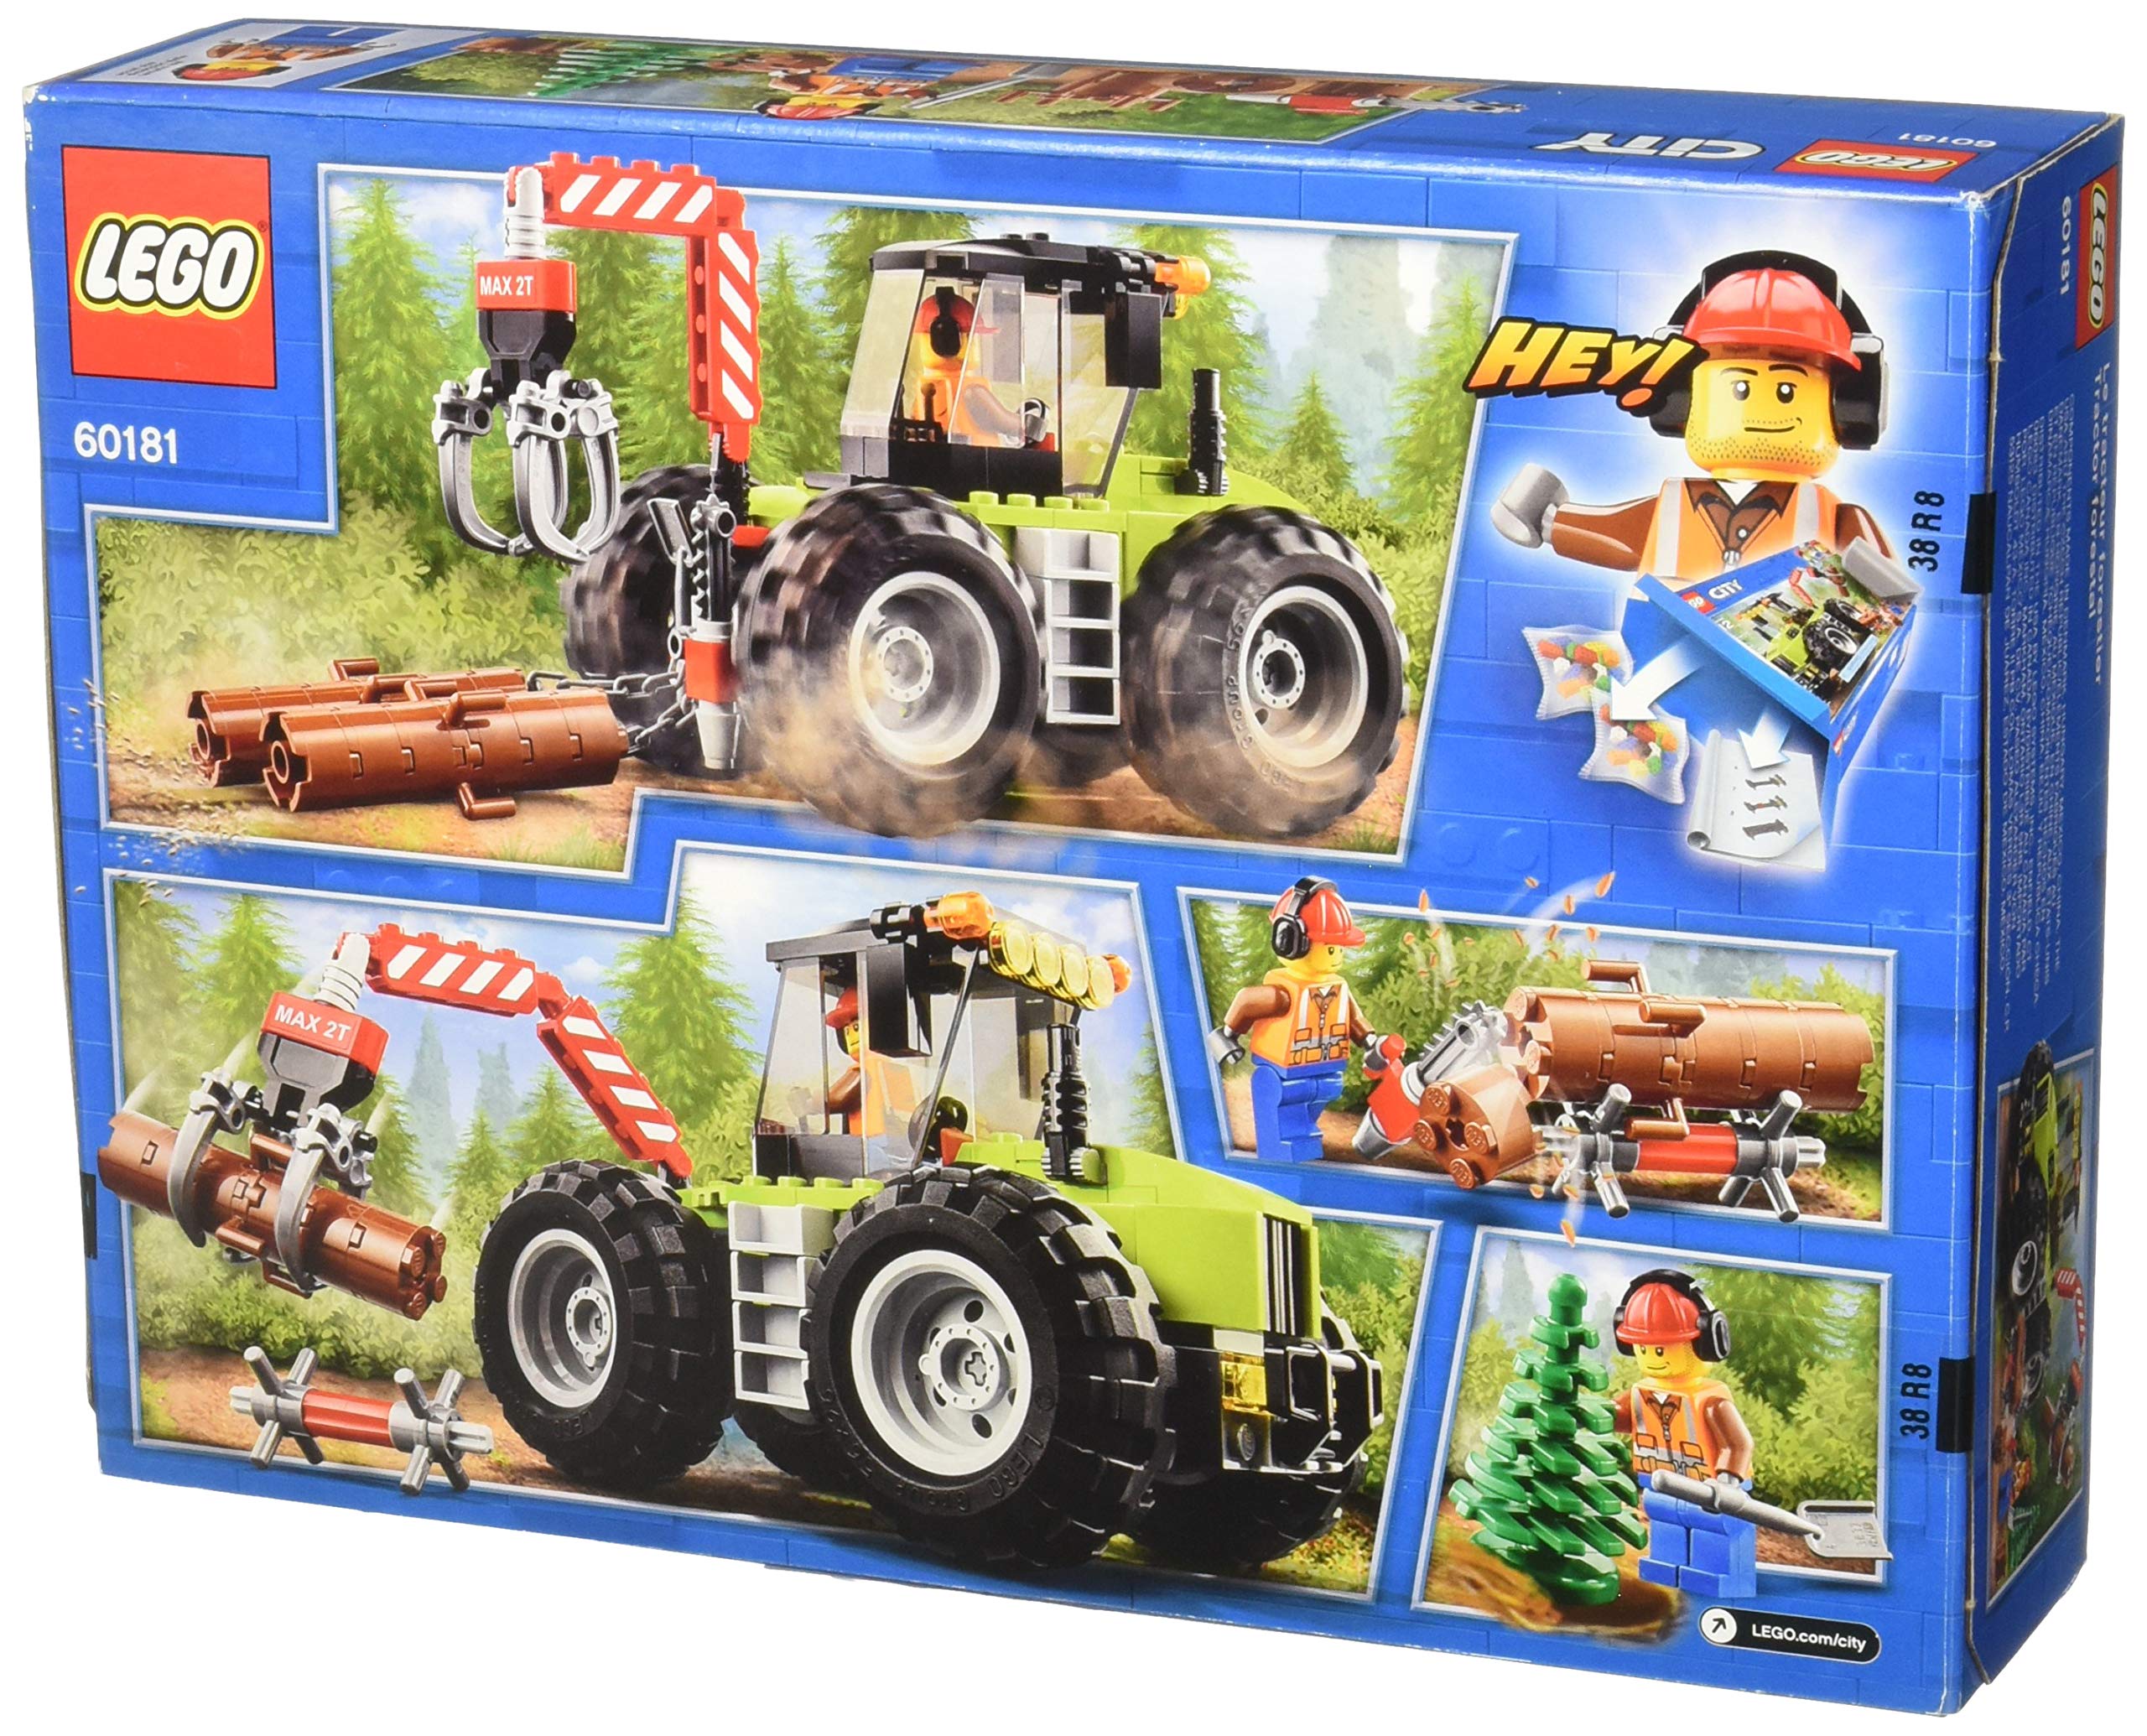 LEGO City Forest Tractor 60181 Building Kit (174 Pieces) (Discontinued by Manufacturer)